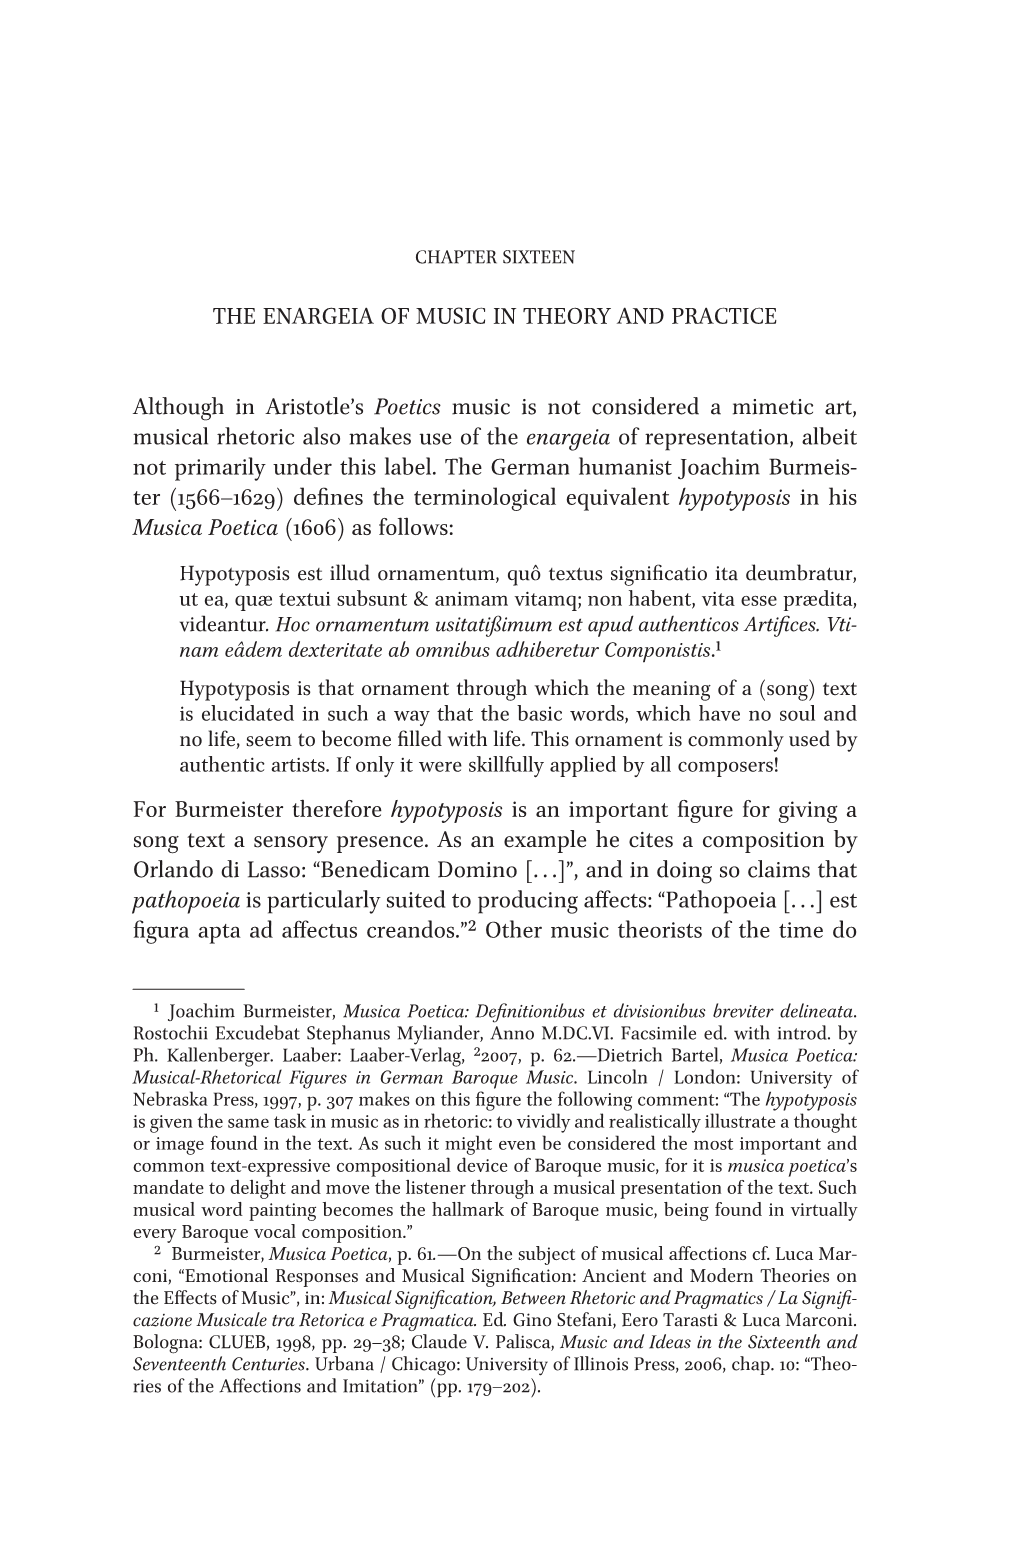 The Enargeia of Music in Theory and Practice Although in Aristotle's